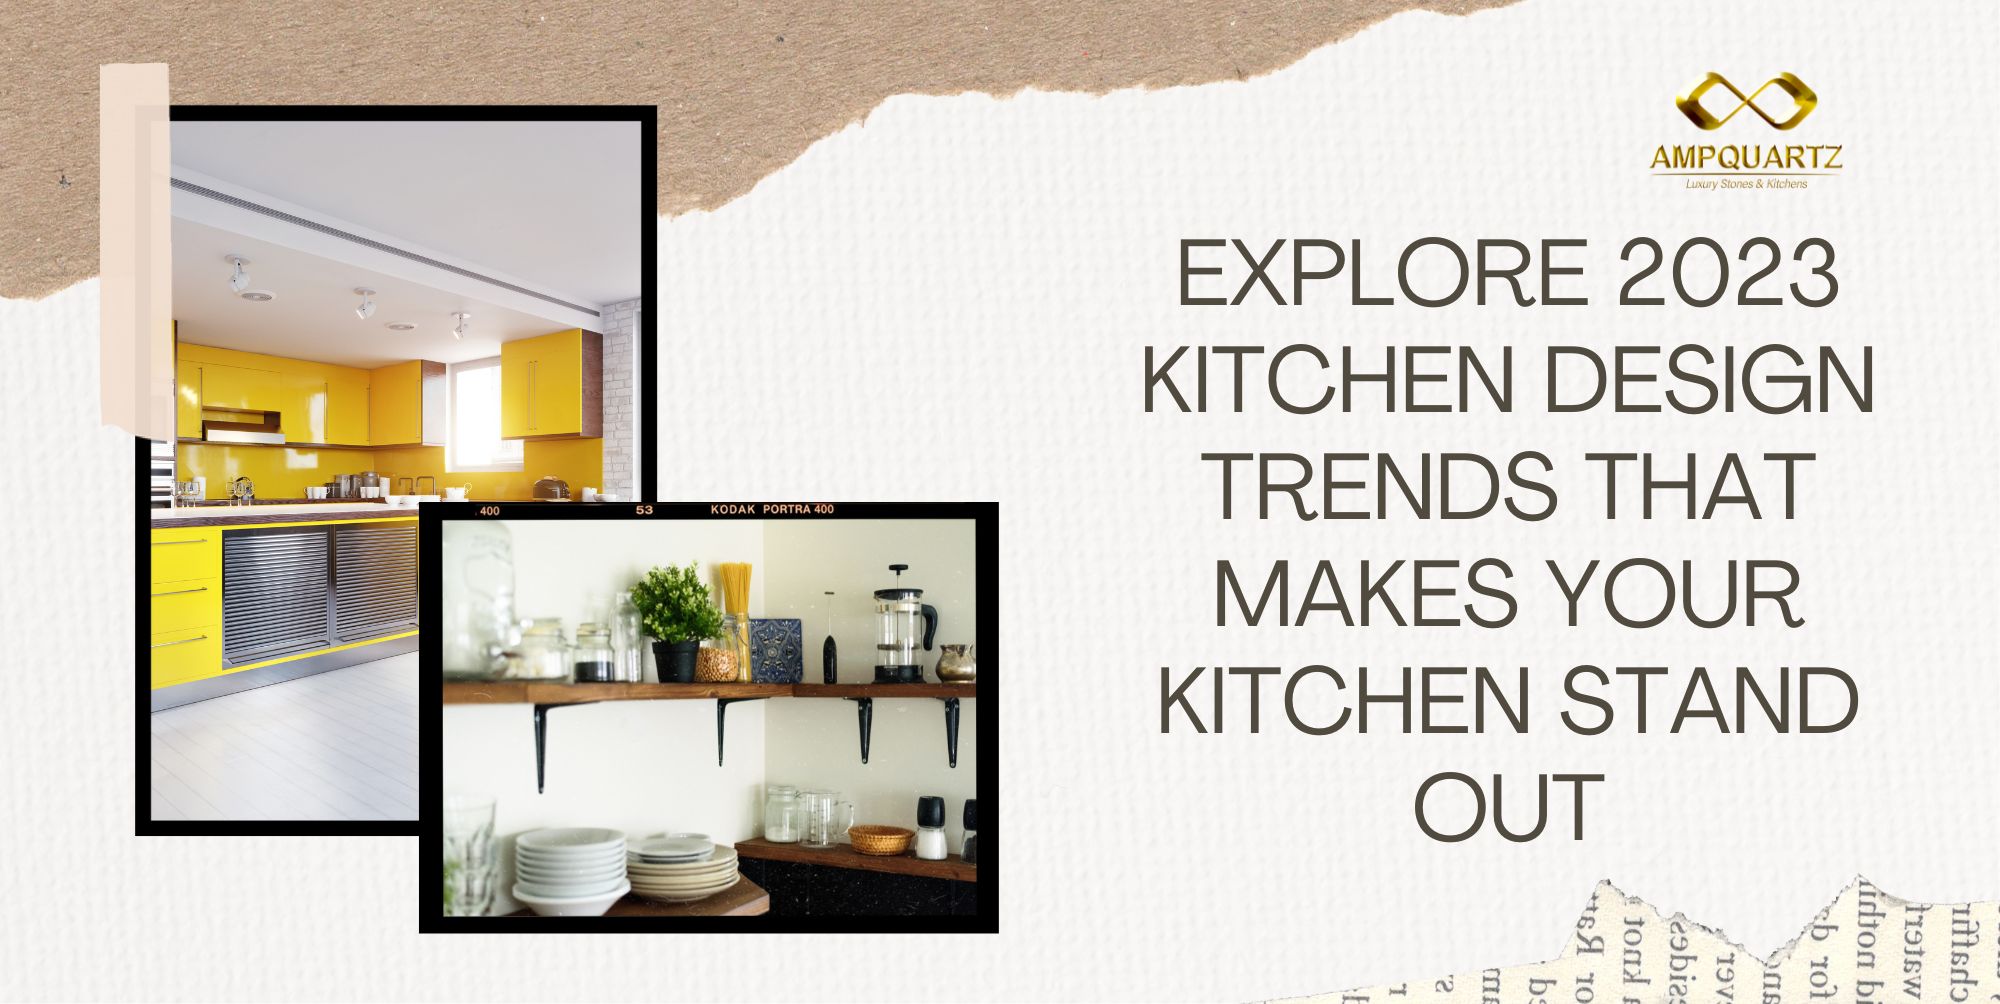 Kitchen countertop trends: 10 standout surfaces for 2023